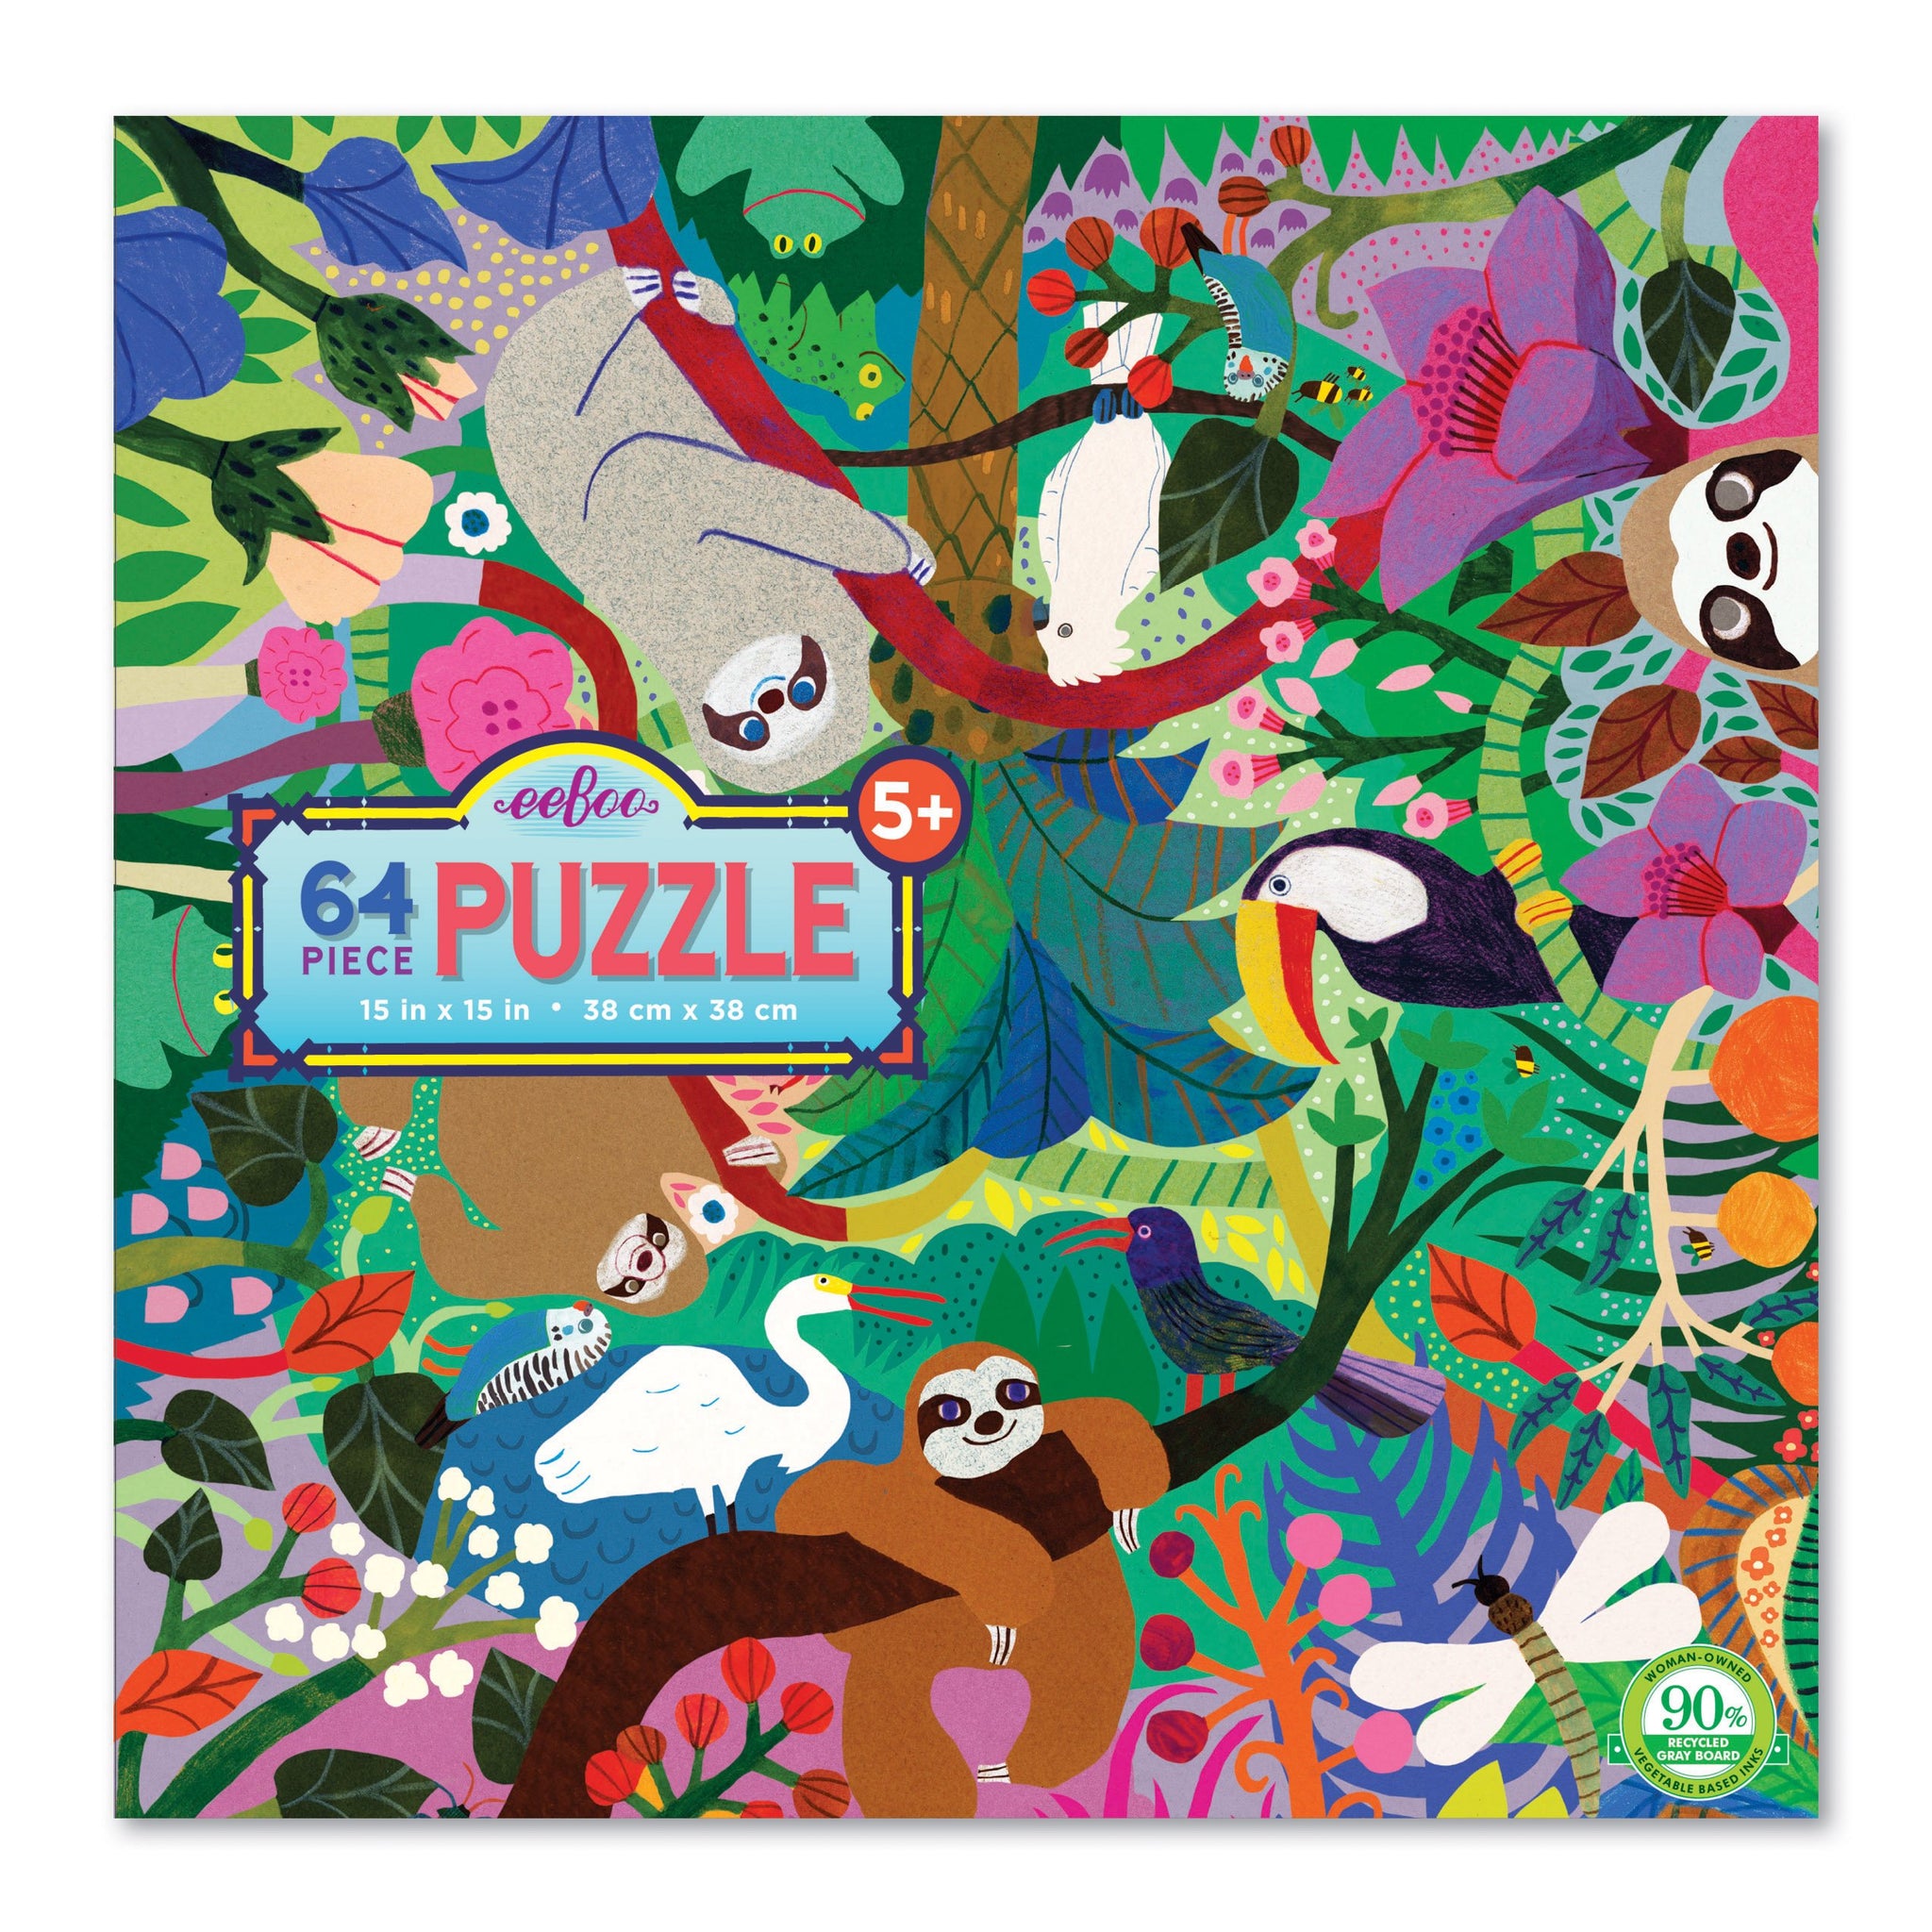 64 piece puzzle - Sloths at Play